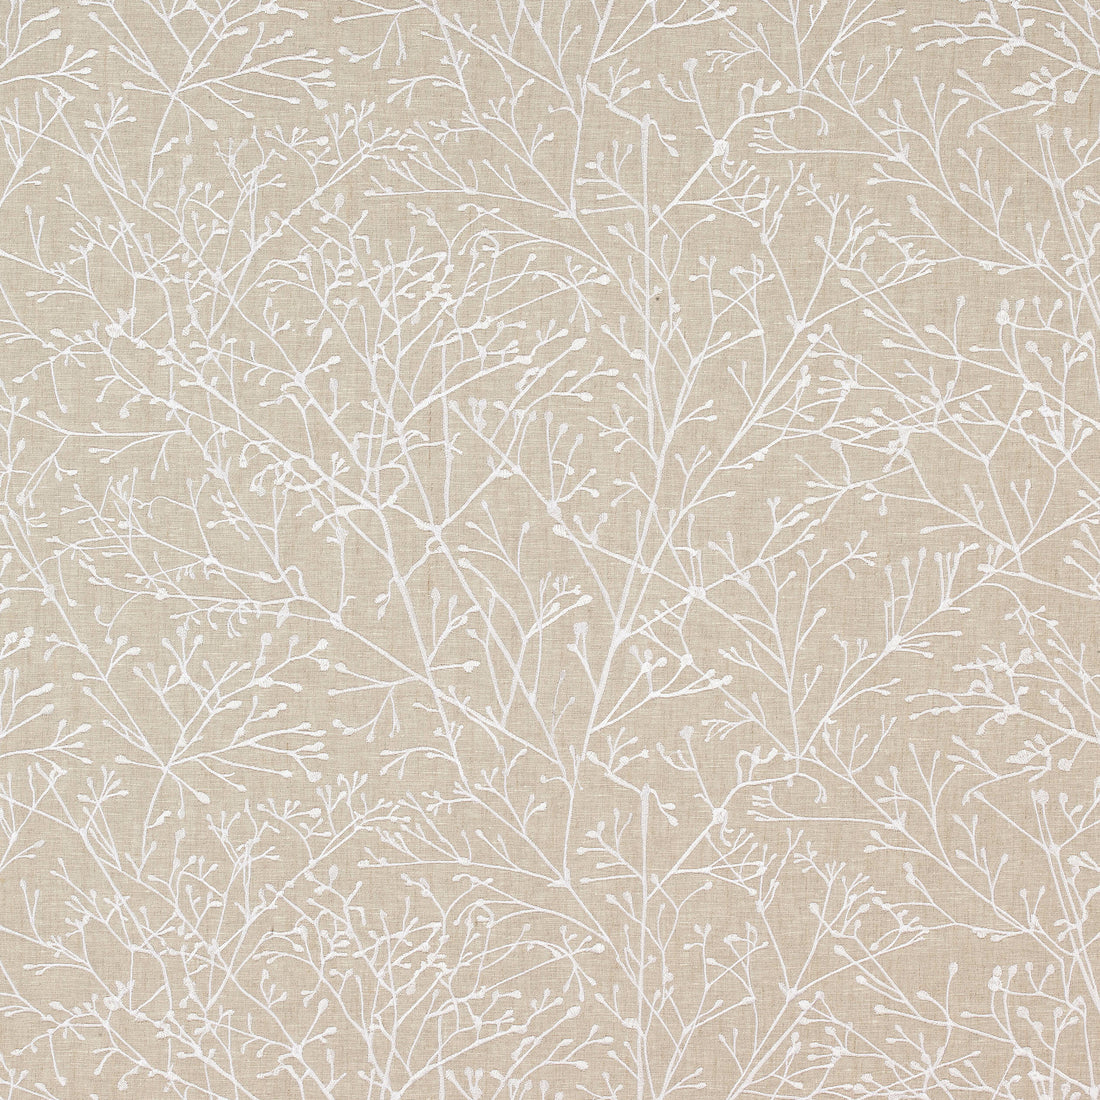 Zola Embroidery fabric in natural color - pattern number AW9101 - by Anna French in the Natural Glimmer collection